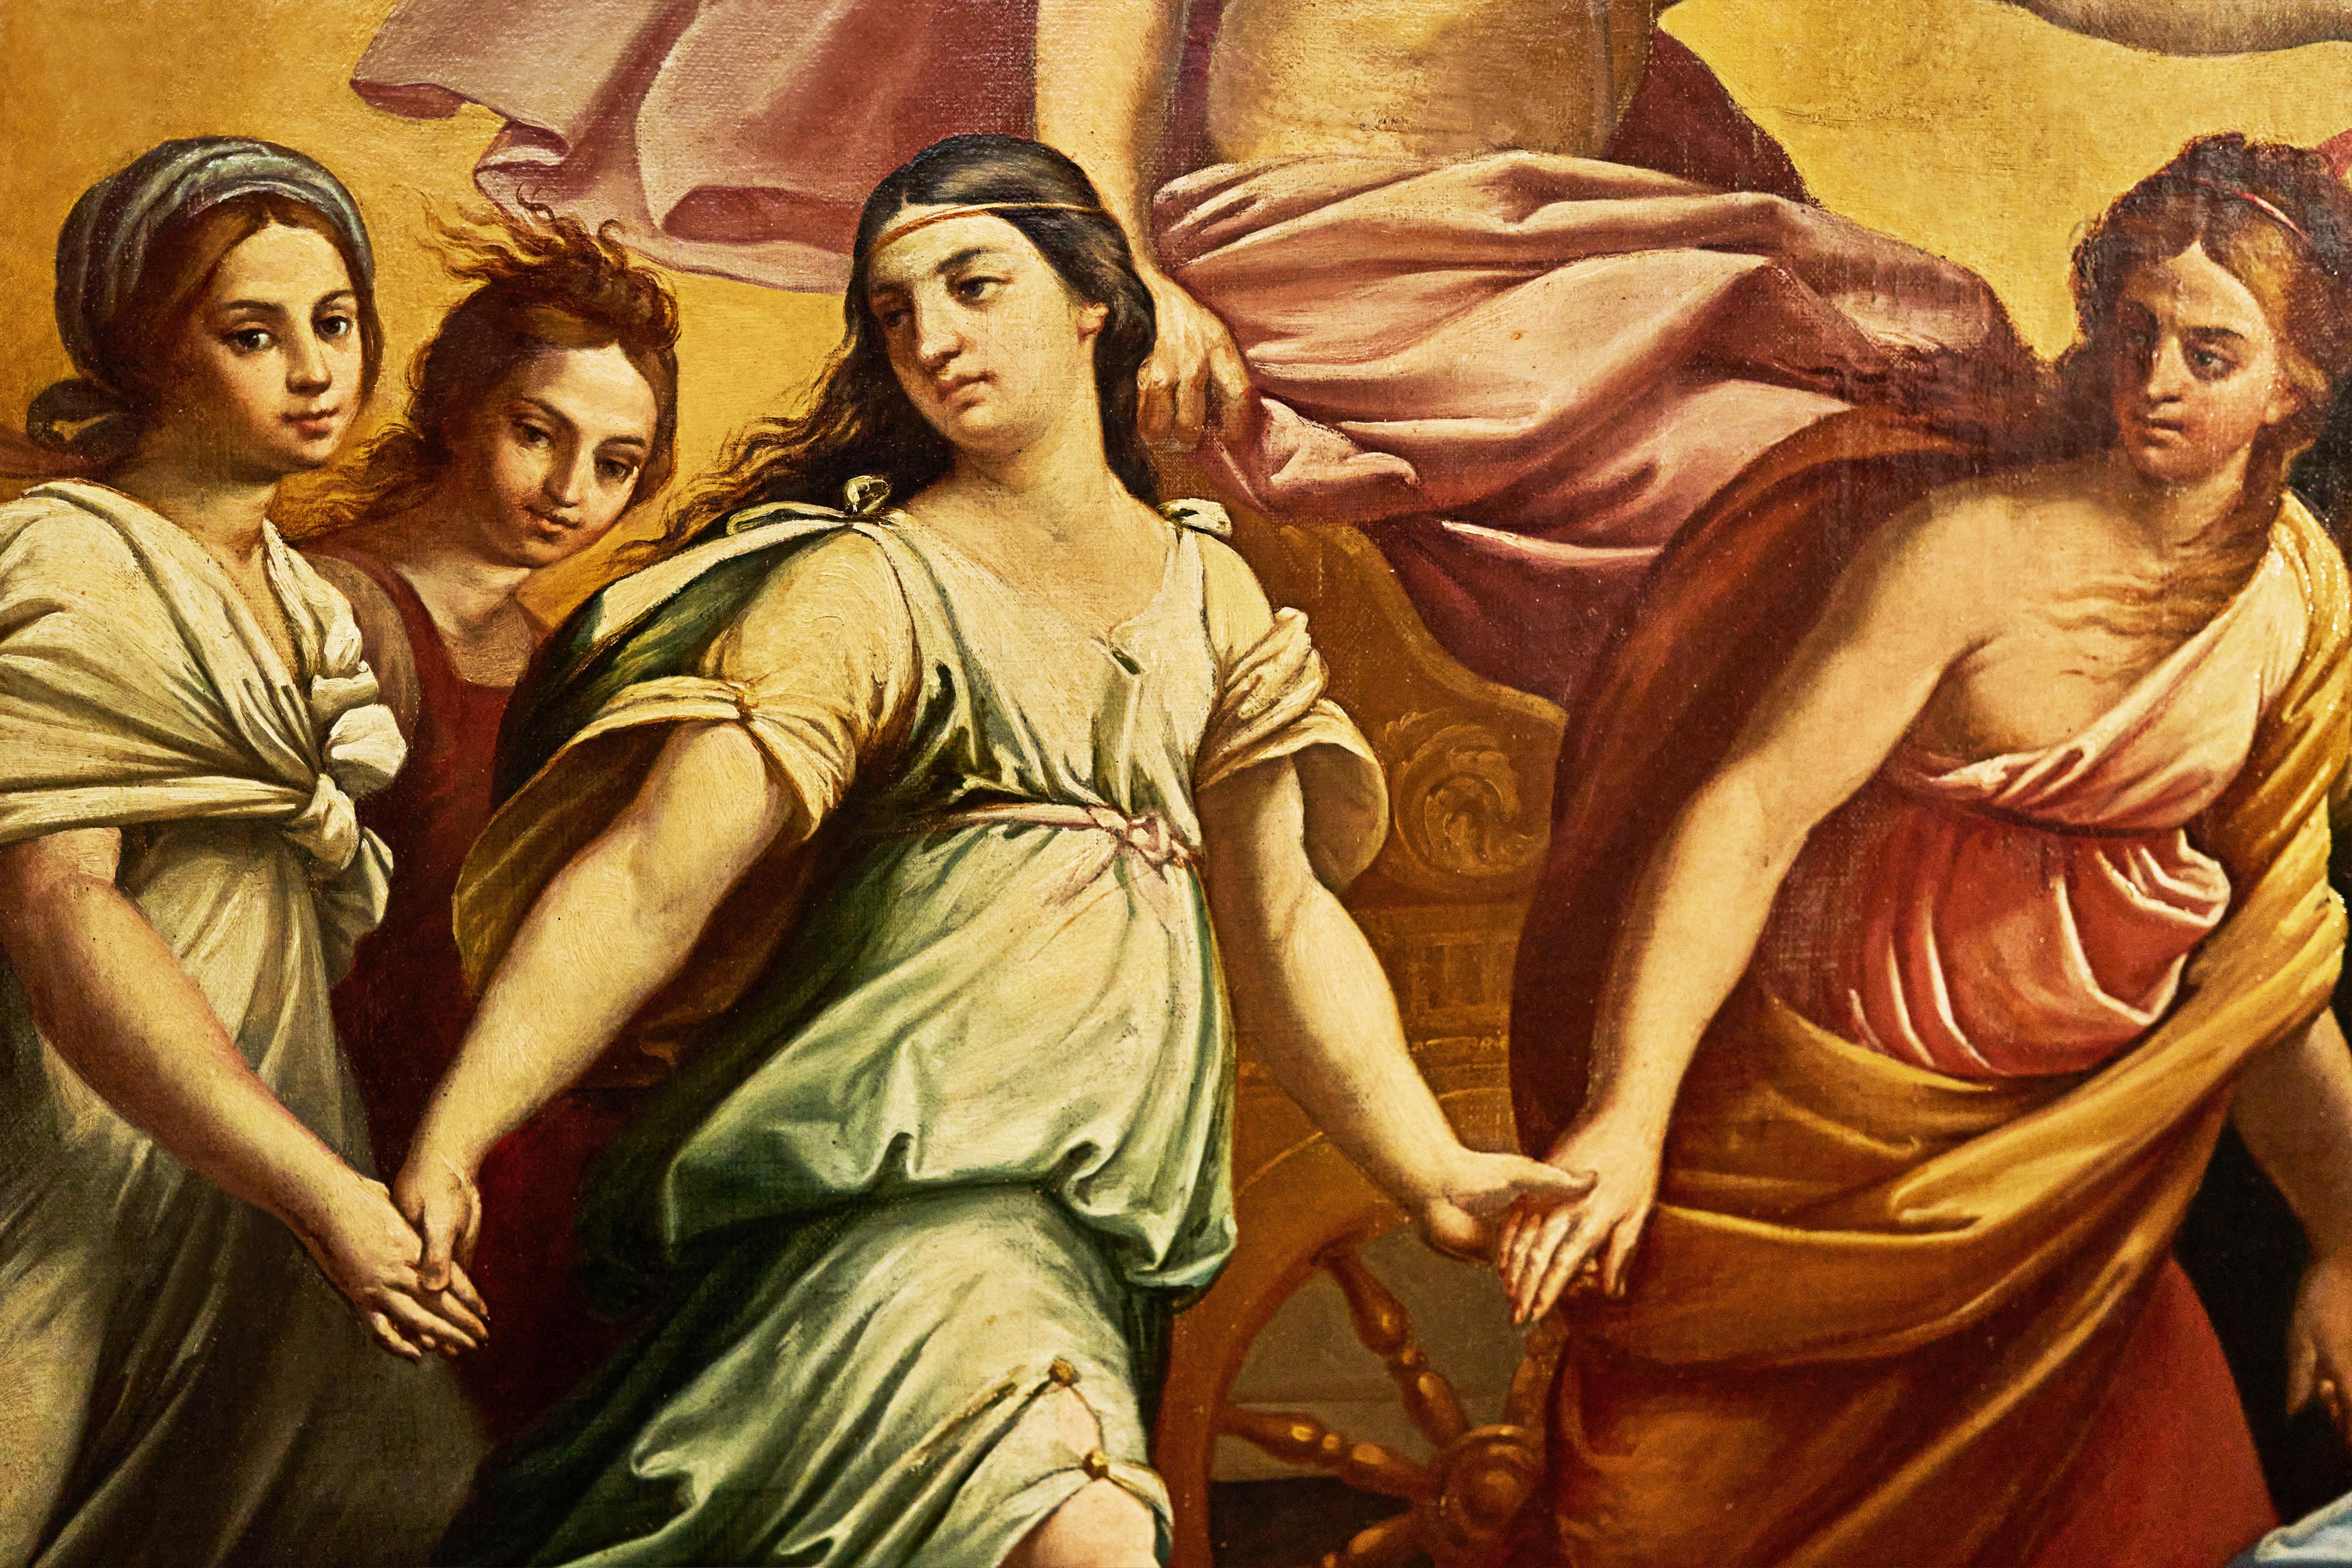 A monumental 19th century Italian oil painting on canvas.
Titled: Aurora, after Guido Reni.
Presented in the original carved gilt-wood frame.

Guido Reni’s masterpiece L’Aurora was executed in 1614, and the striking image is as powerful today as it